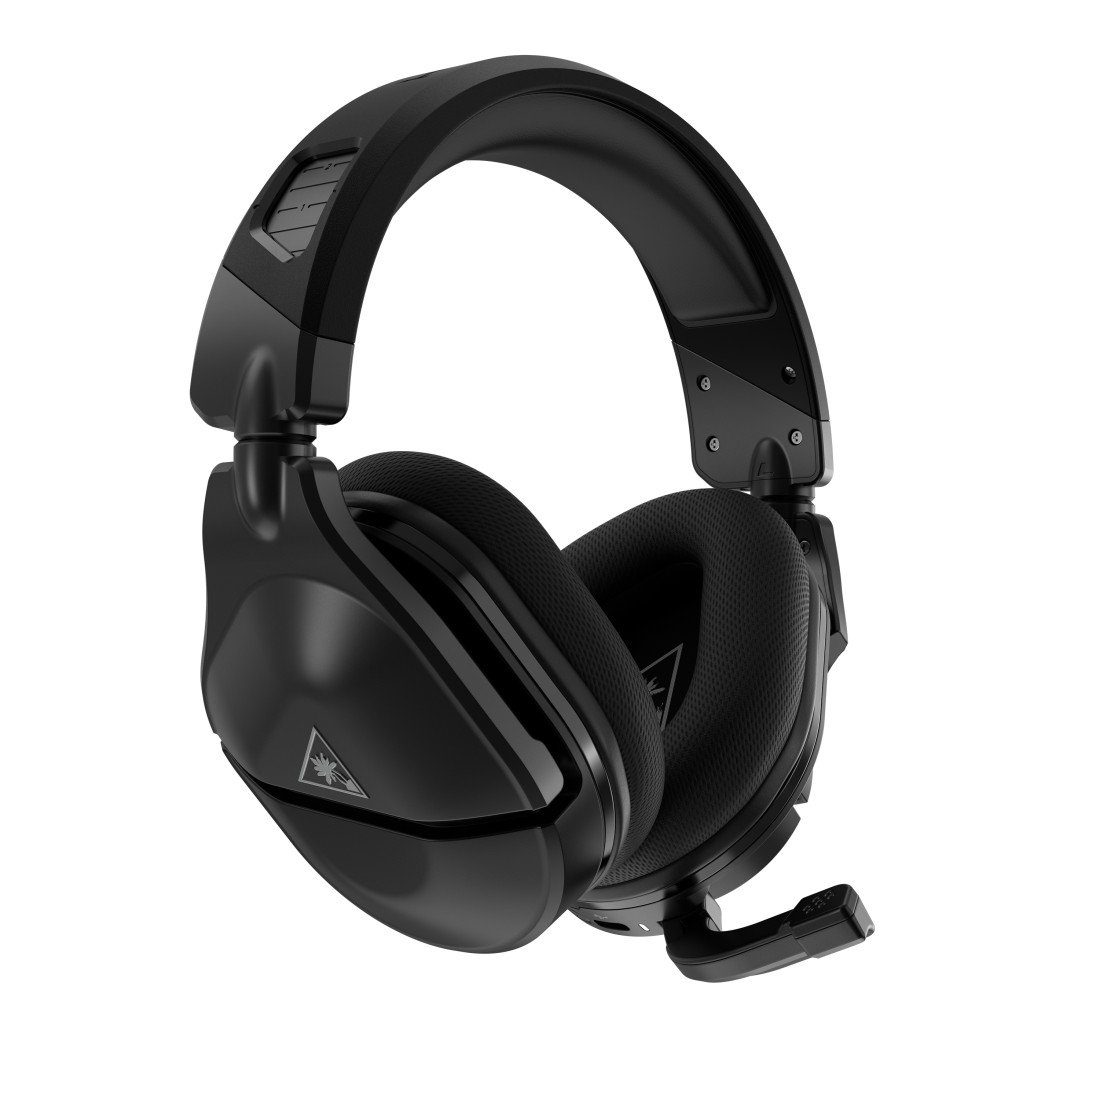 Gamingheadsets online OTTO Gamer | » kaufen Headsets